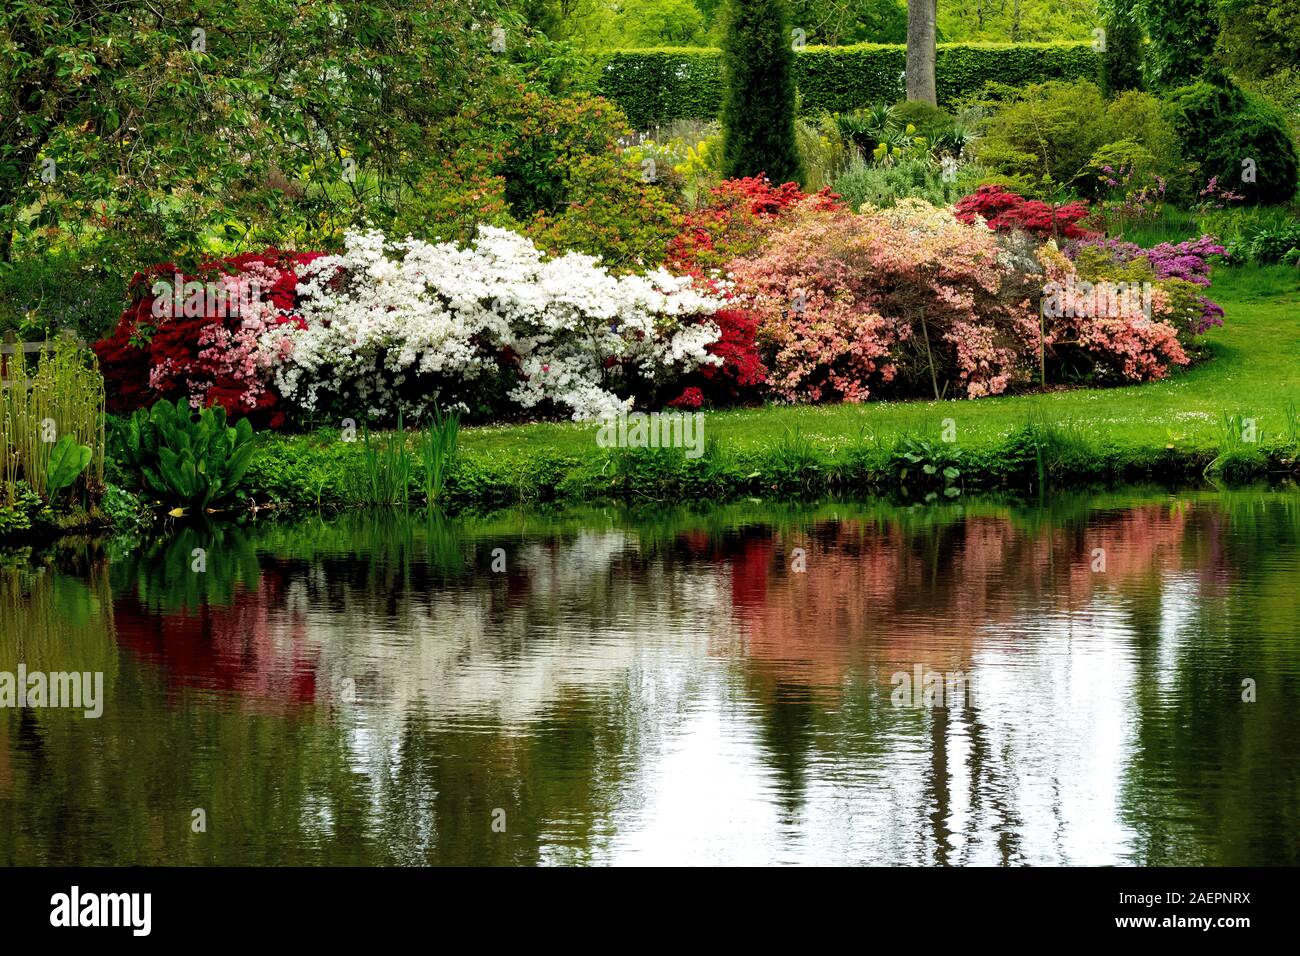 Reflections of Azaleas and Rhododendrons in pond of The Savill botanical garden in Egham, Surrey, UK Stock Photo